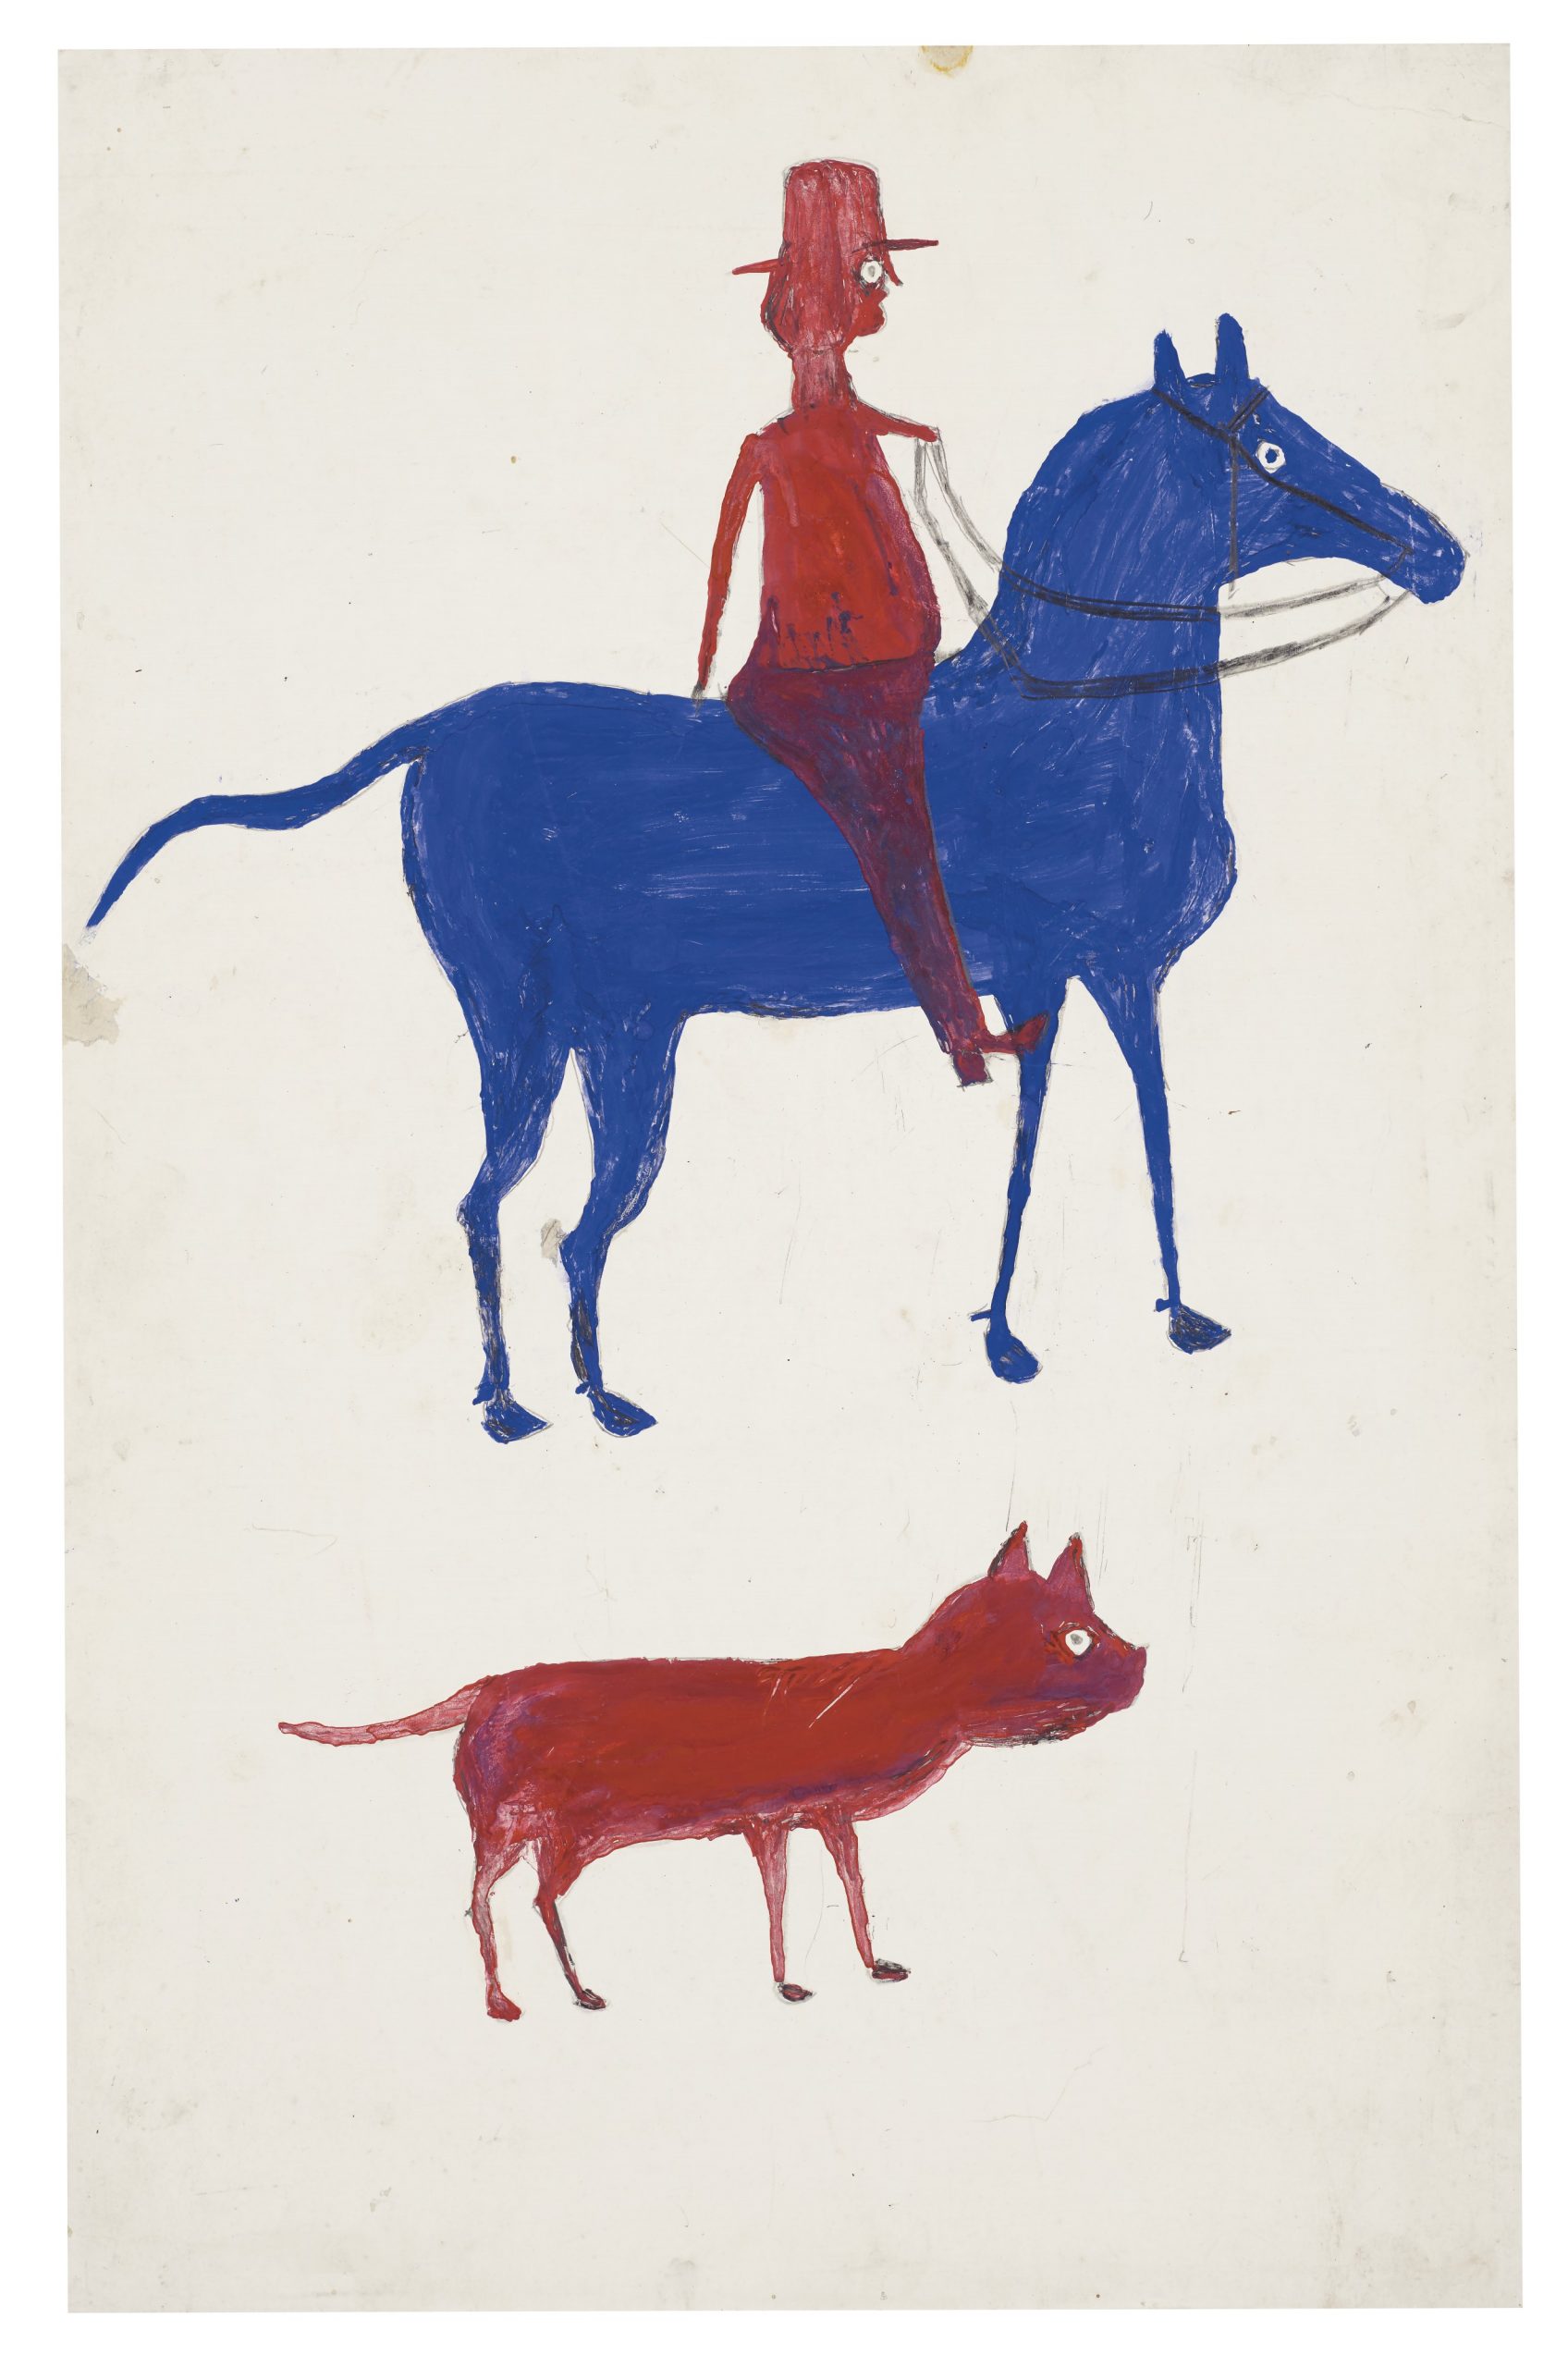 This simple, one dimensional piece portrays a red man riding on a blue horse with a red dog floating in space beneath them. There is no delineation between planes in this image besides the man being on top of the horse.